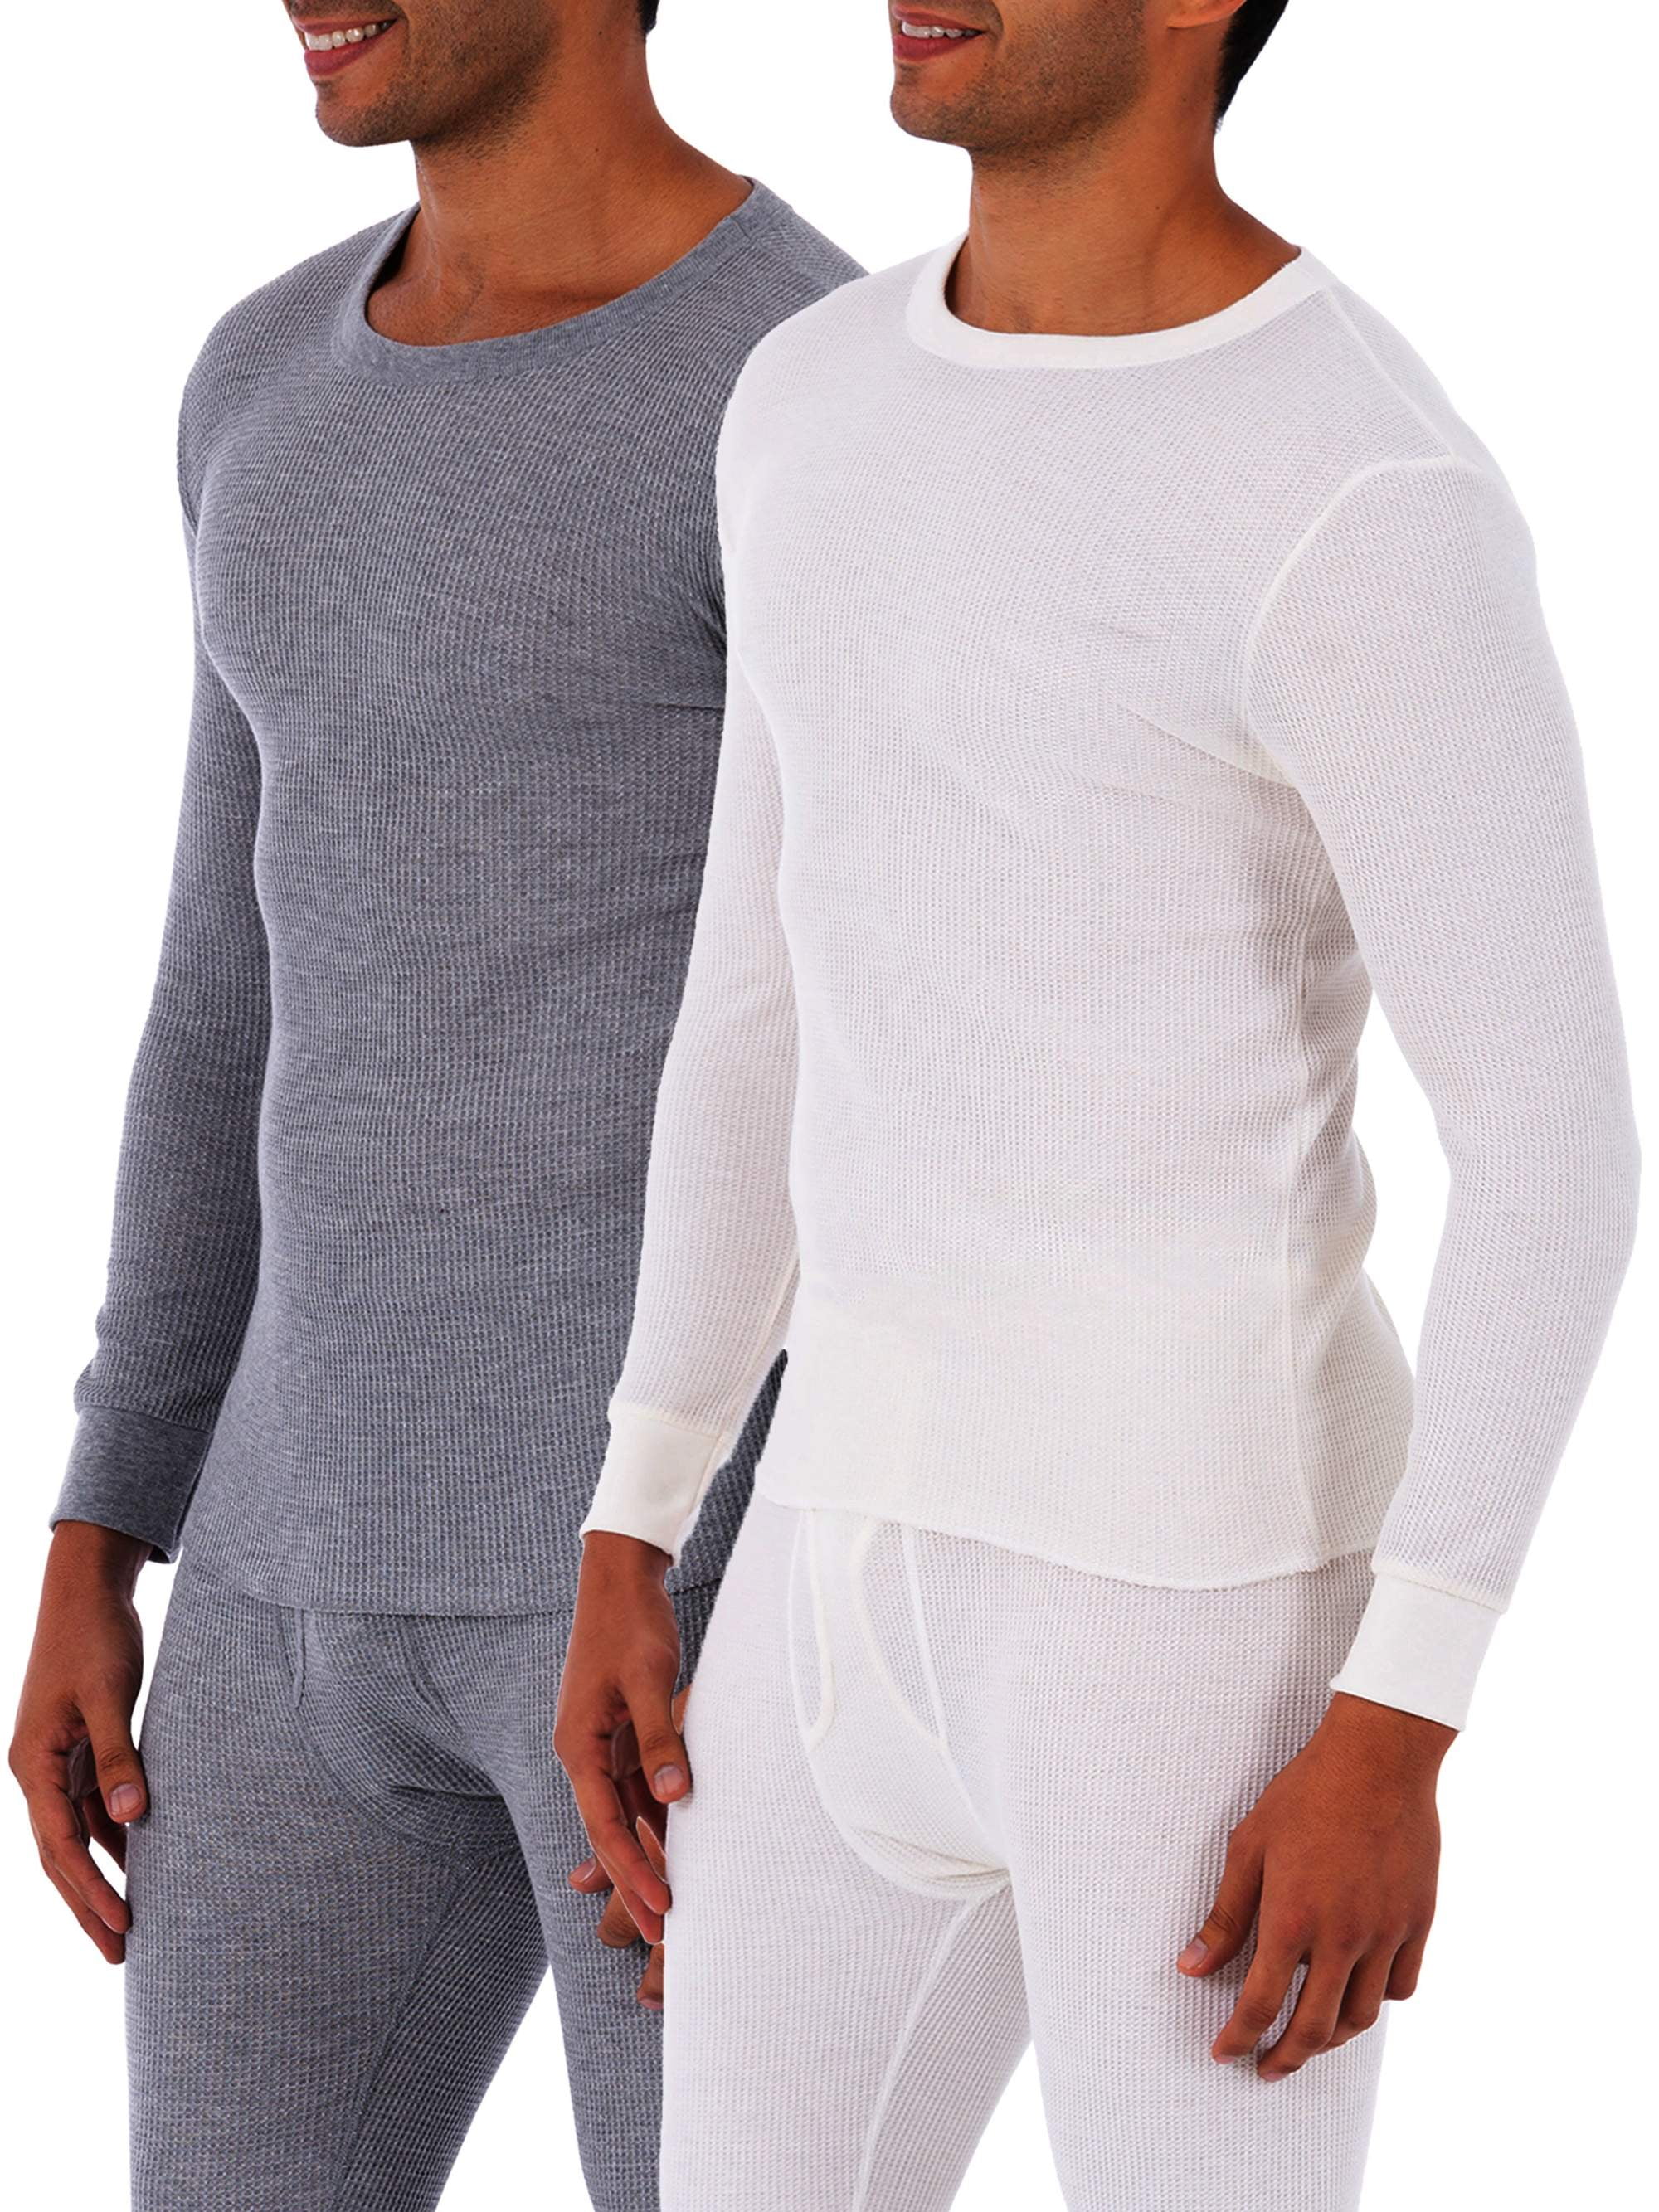 Fruit of the Loom SUPER VALUE Men's Core Waffle Thermal 2 Pack Top ...